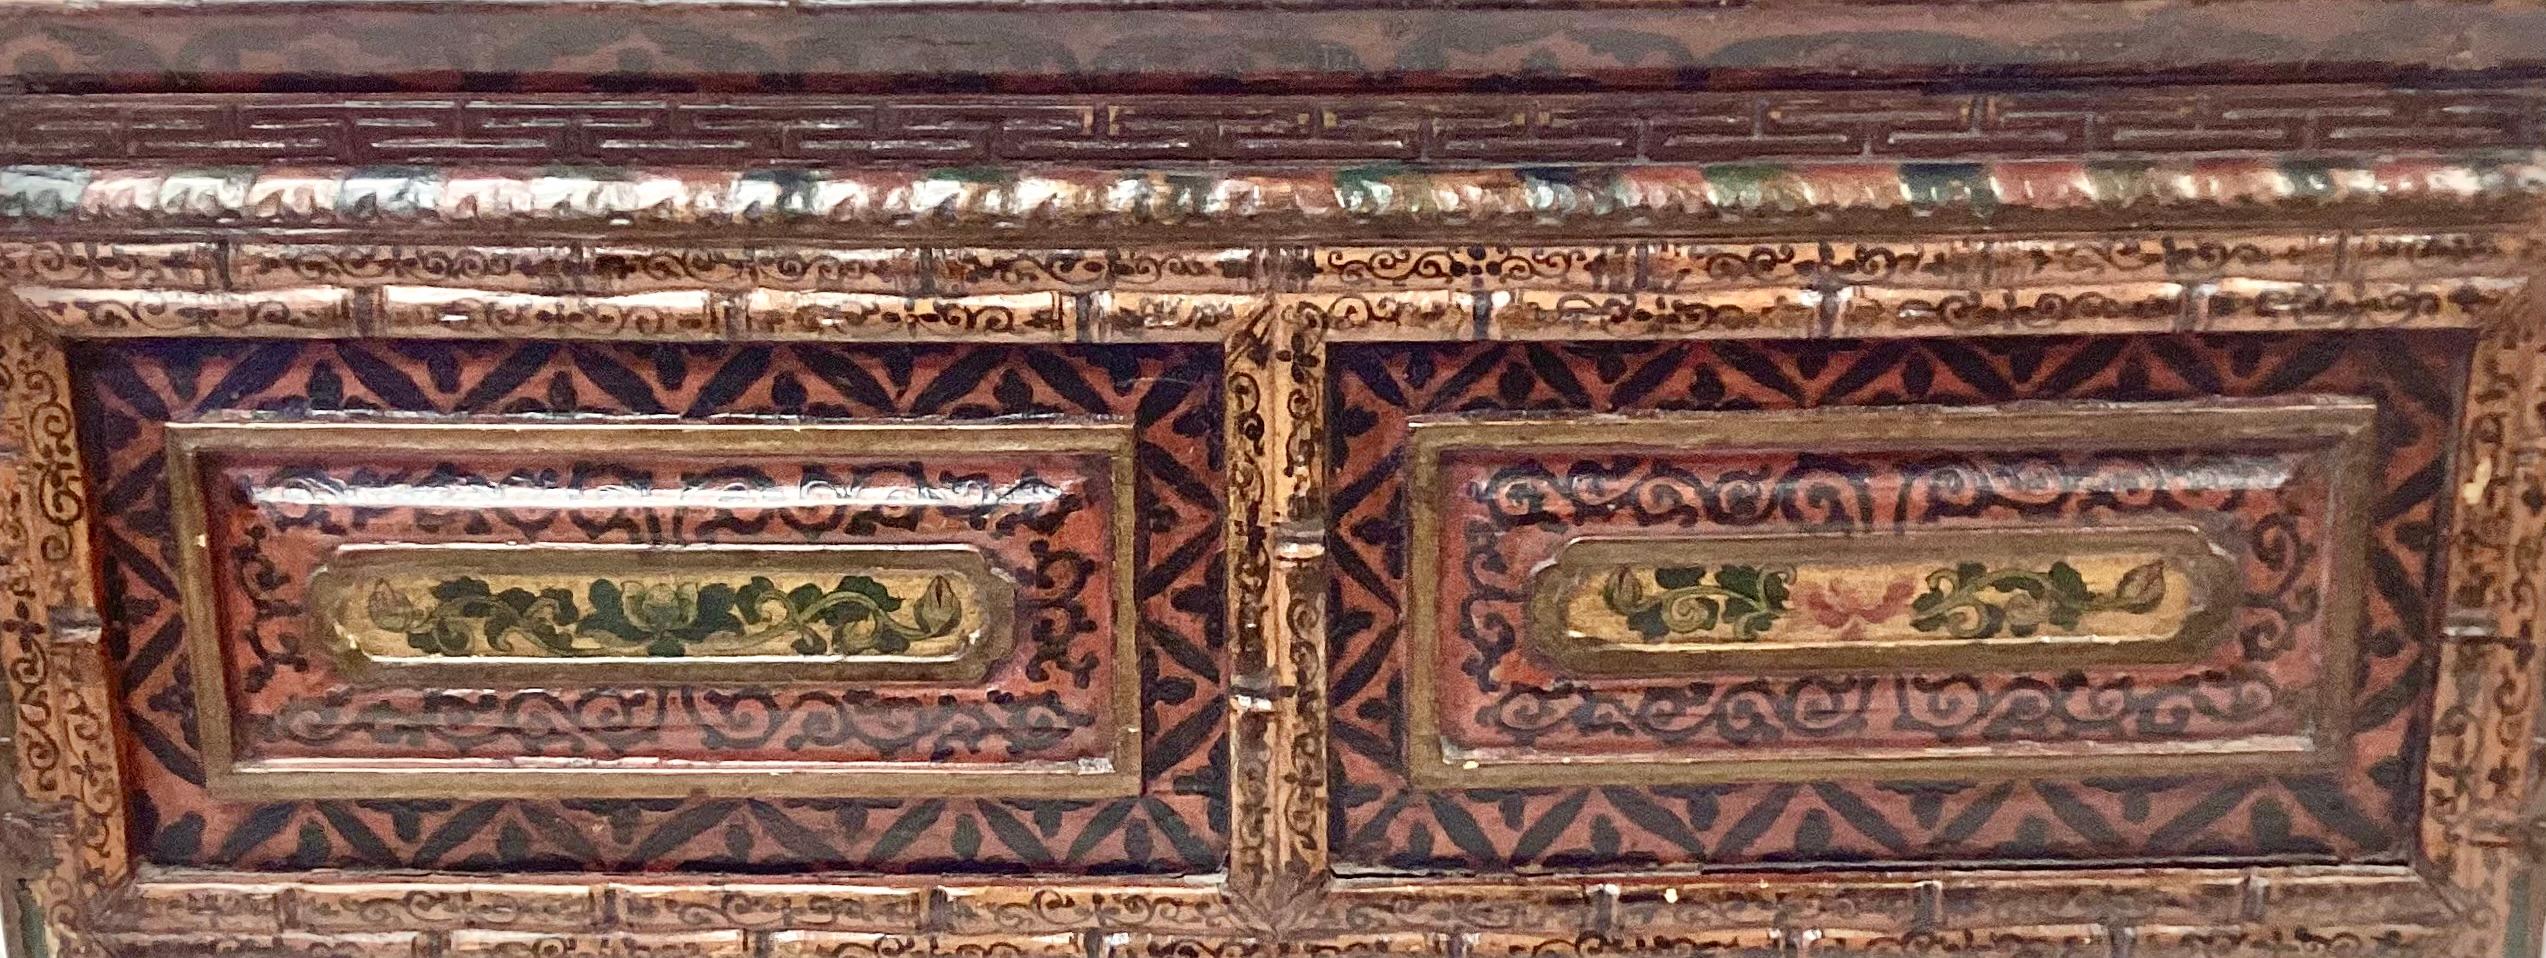 Beautifully hand-painted Tibetan chest, used by Buddhist monks in a temple for praying and storing prayer books. Chest has one drawer (pulls out from end--see pics). Chest is made of wood with a floral and foliage design in dark brown, tan and